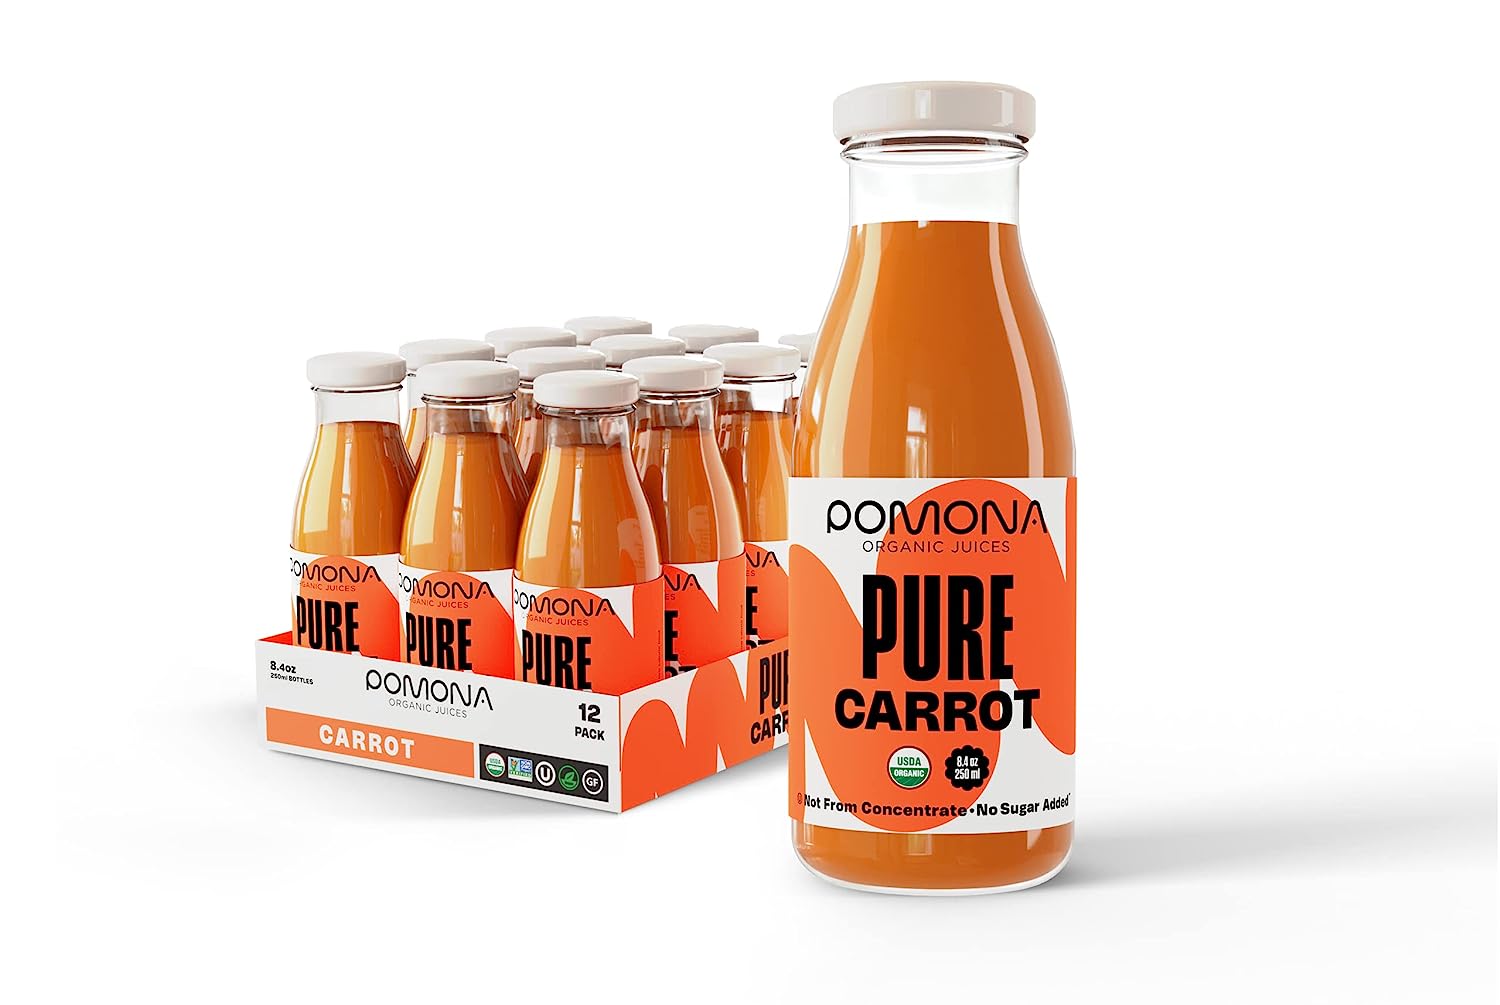 Pomona Organic Carrot Juice (Pack of 12), Cold Pressed USDA Organic Juices,  100% Carrots, No Added Sugar, Not From Concentrate, Vegan, Kosher, Non GMO,  Pasteurized, 8.4 oz Glass Bottles